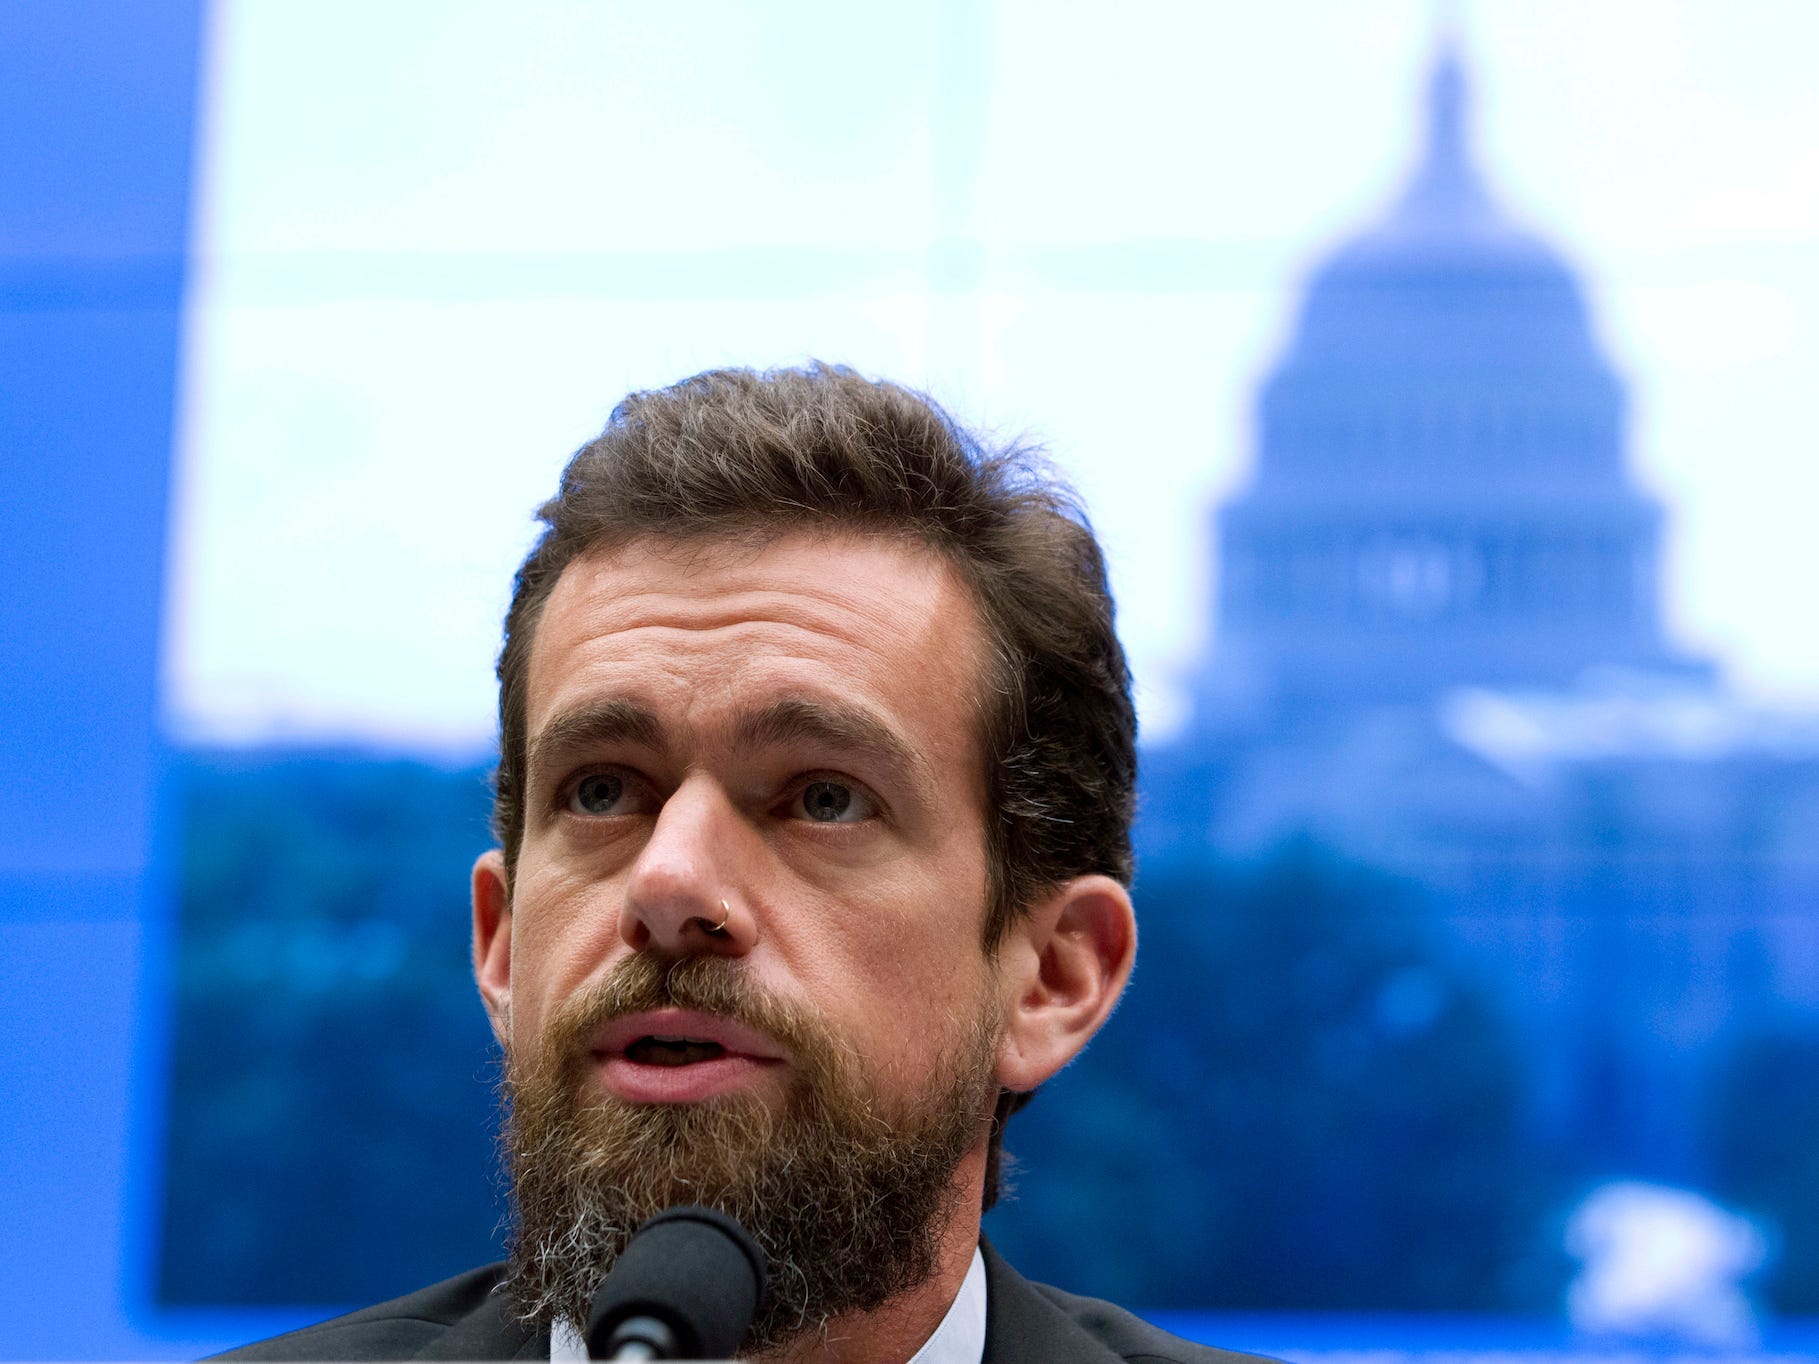 Jack Dorsey speaking into a microphone with a blue scene in the background.